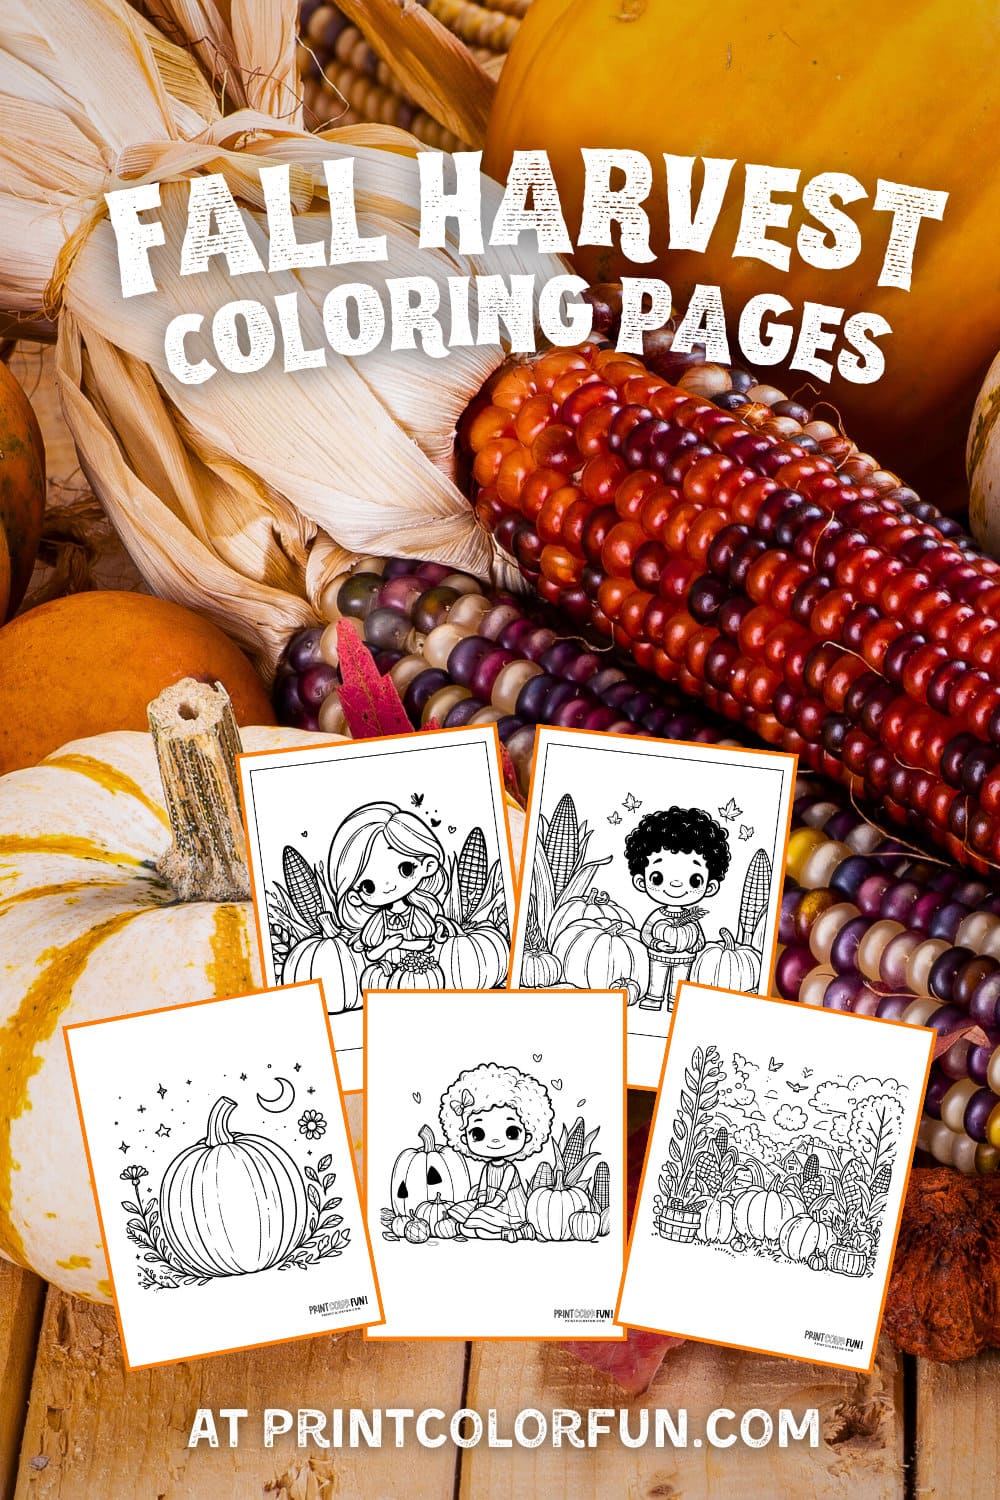 Fall harvest autumn coloring pages and clipart - PrintColorFun com